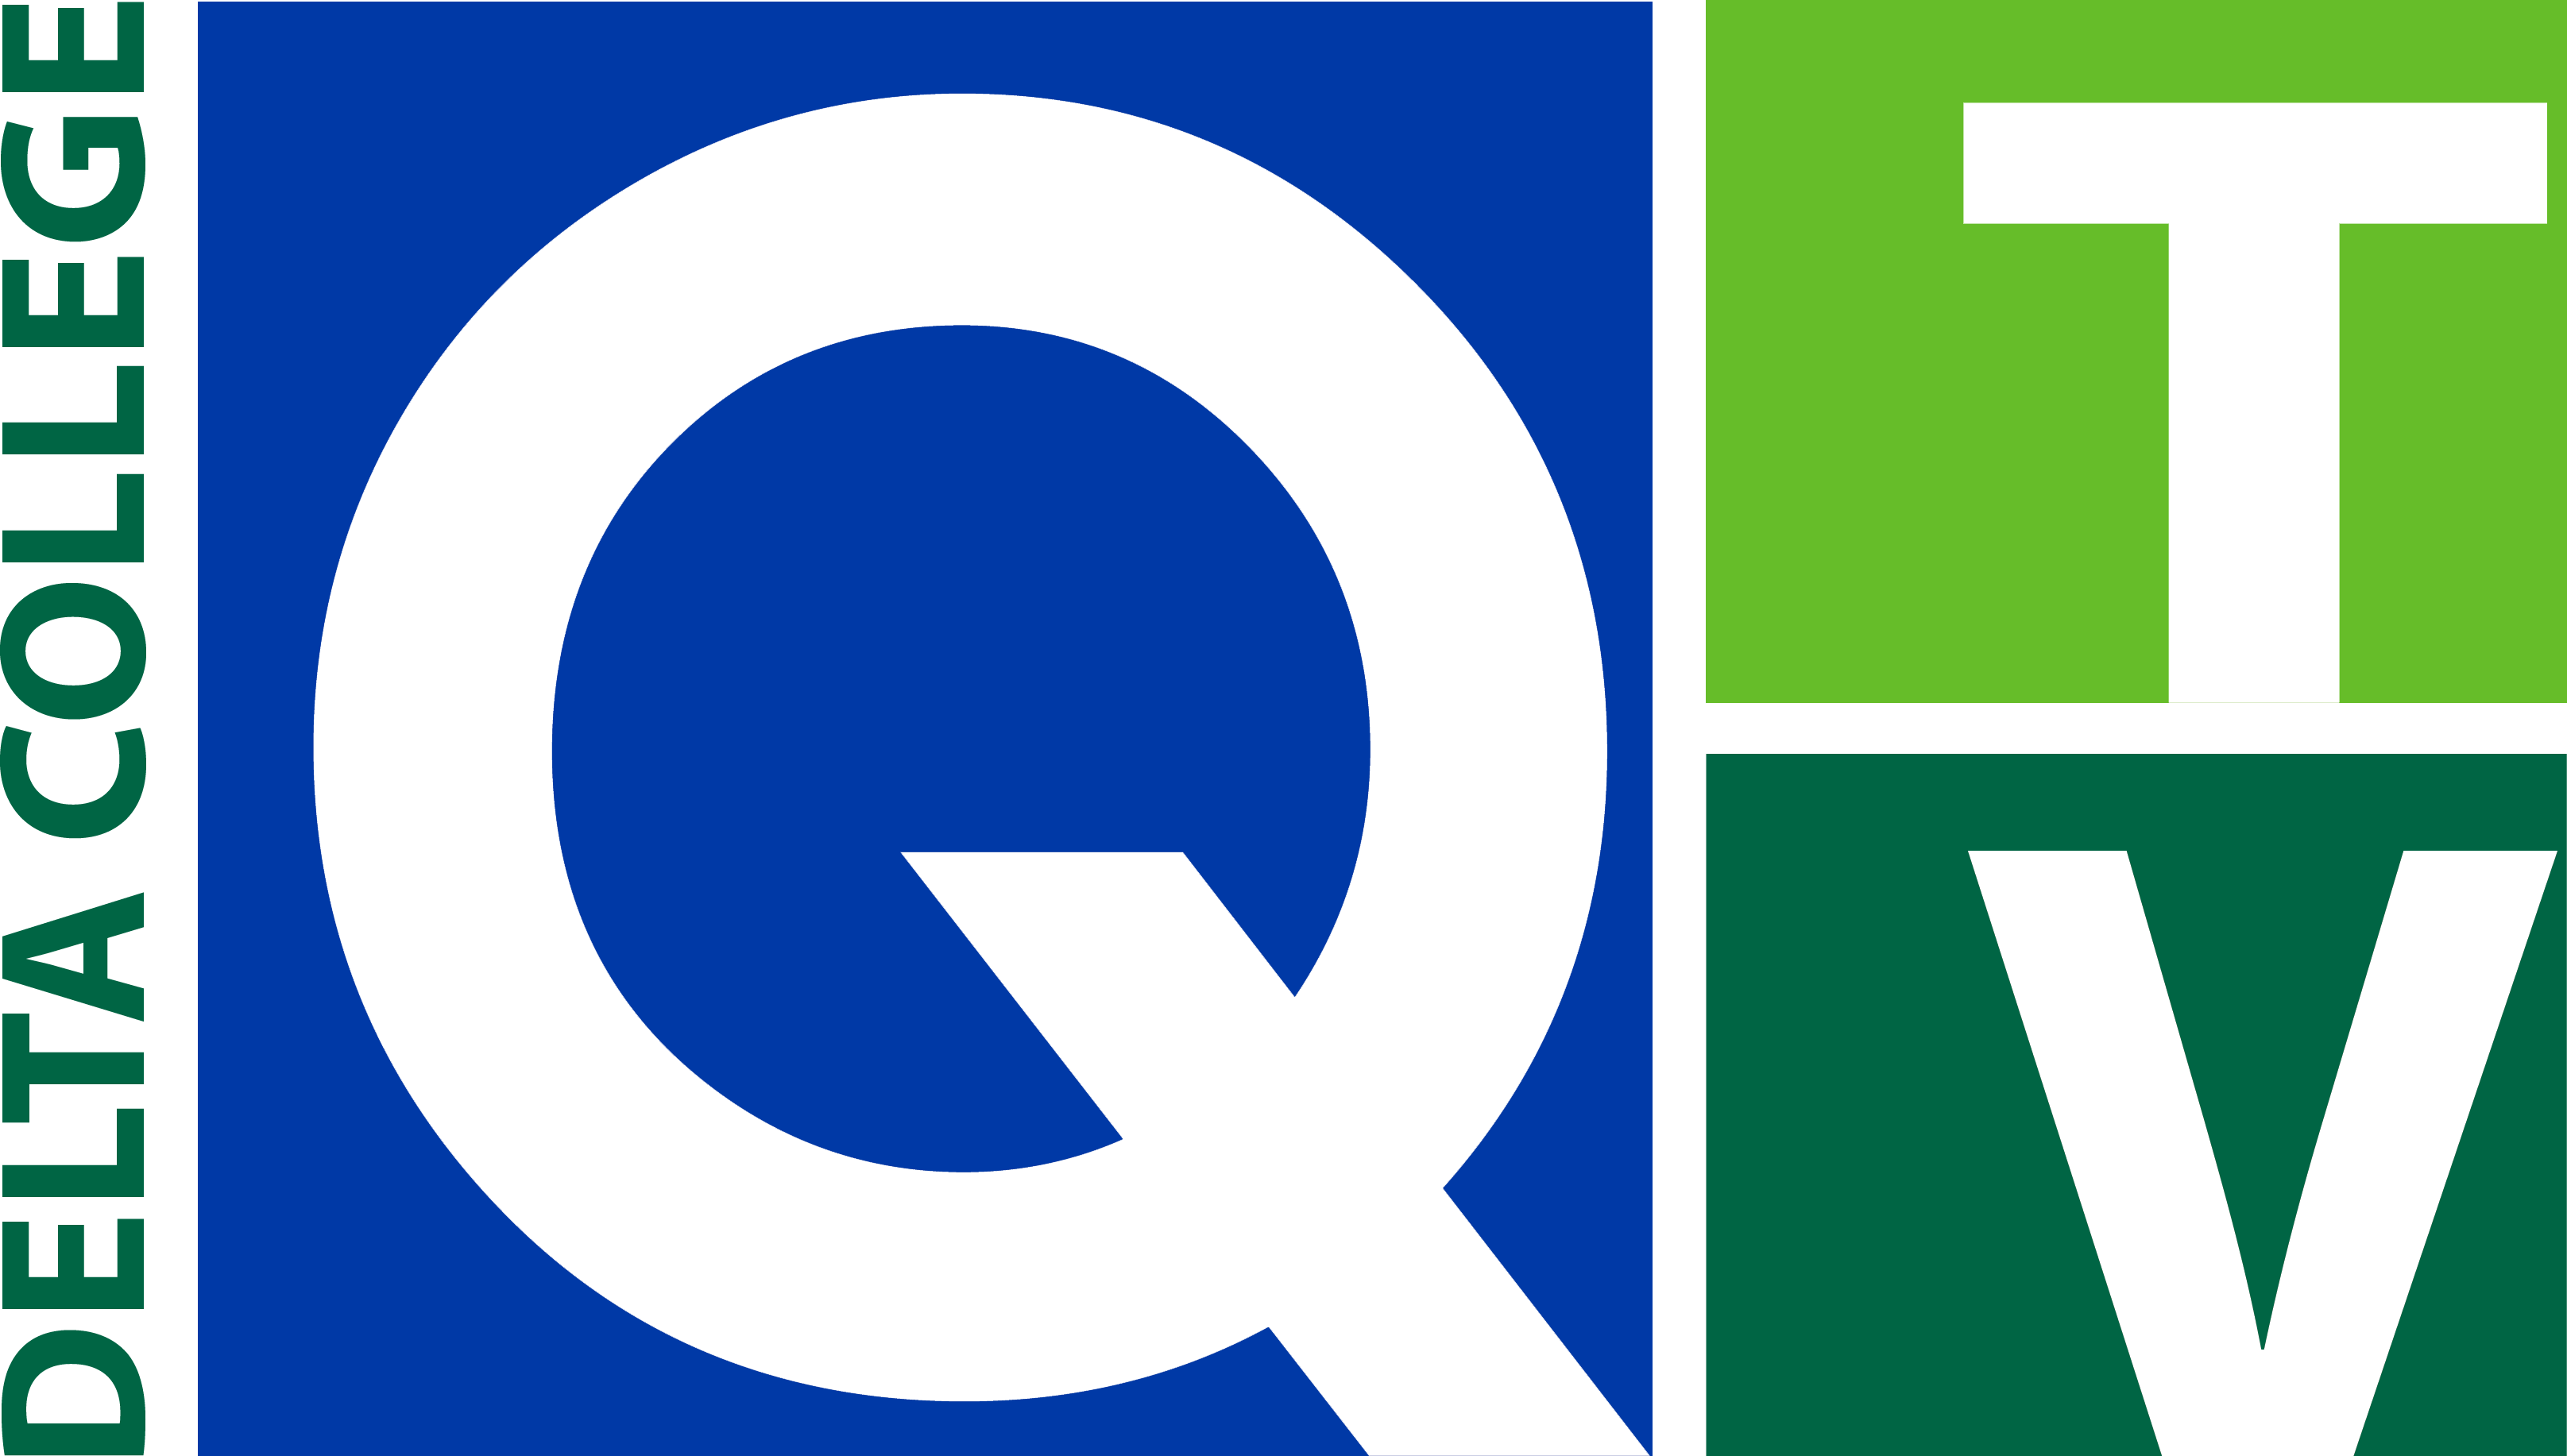 What Has a Blue Q Logo - Brand Resources | Delta Broadcasting